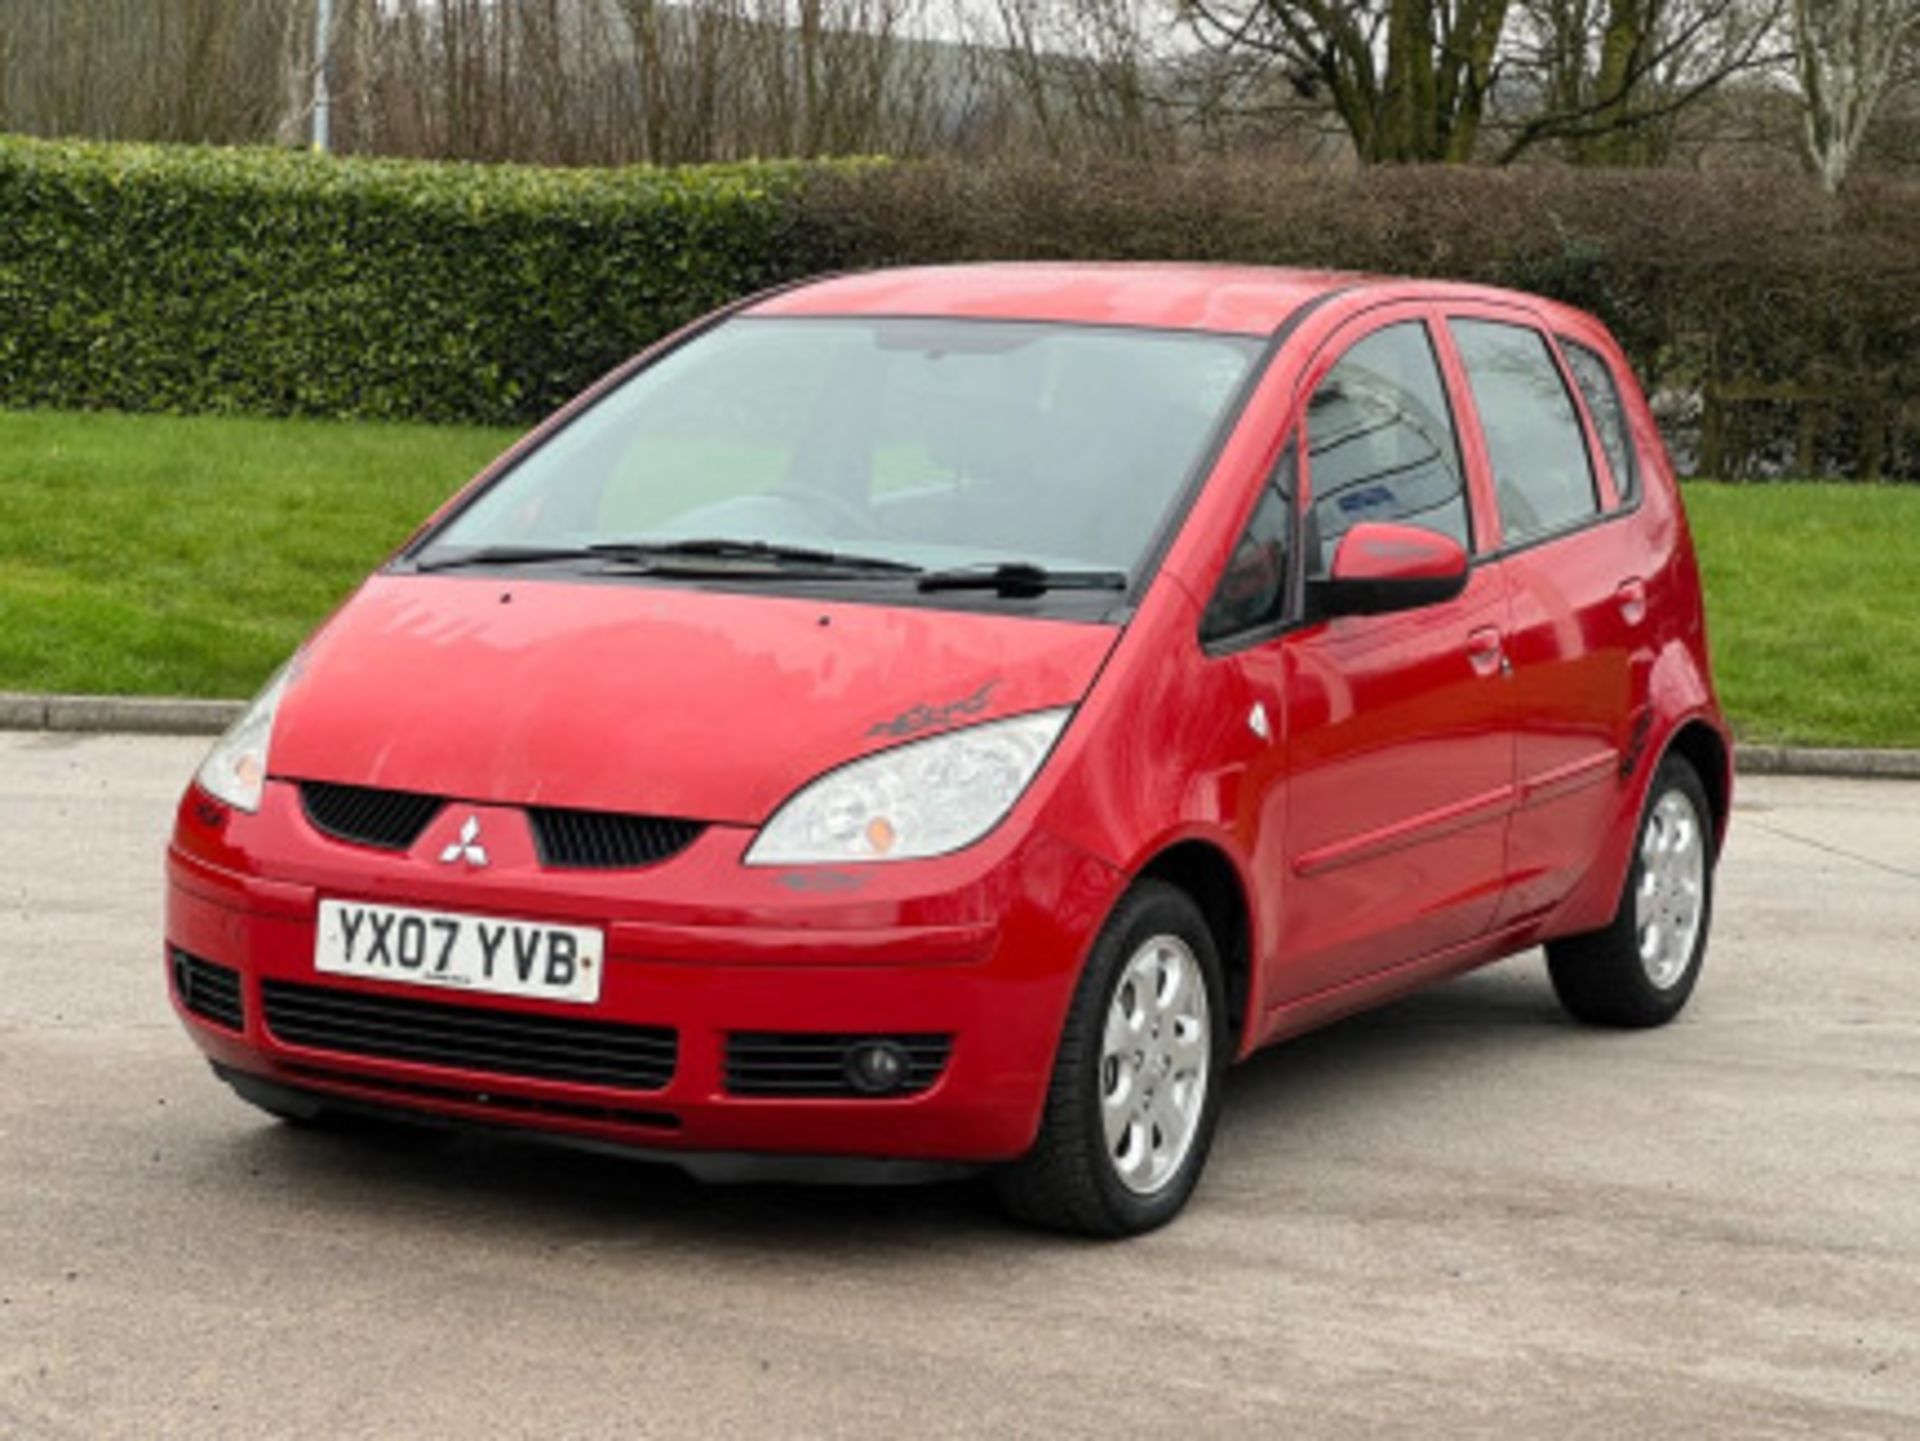 2007 MITSUBISHI COLT 1.5 DI-D DIESEL AUTOMATIC >>--NO VAT ON HAMMER--<< - Image 82 of 191